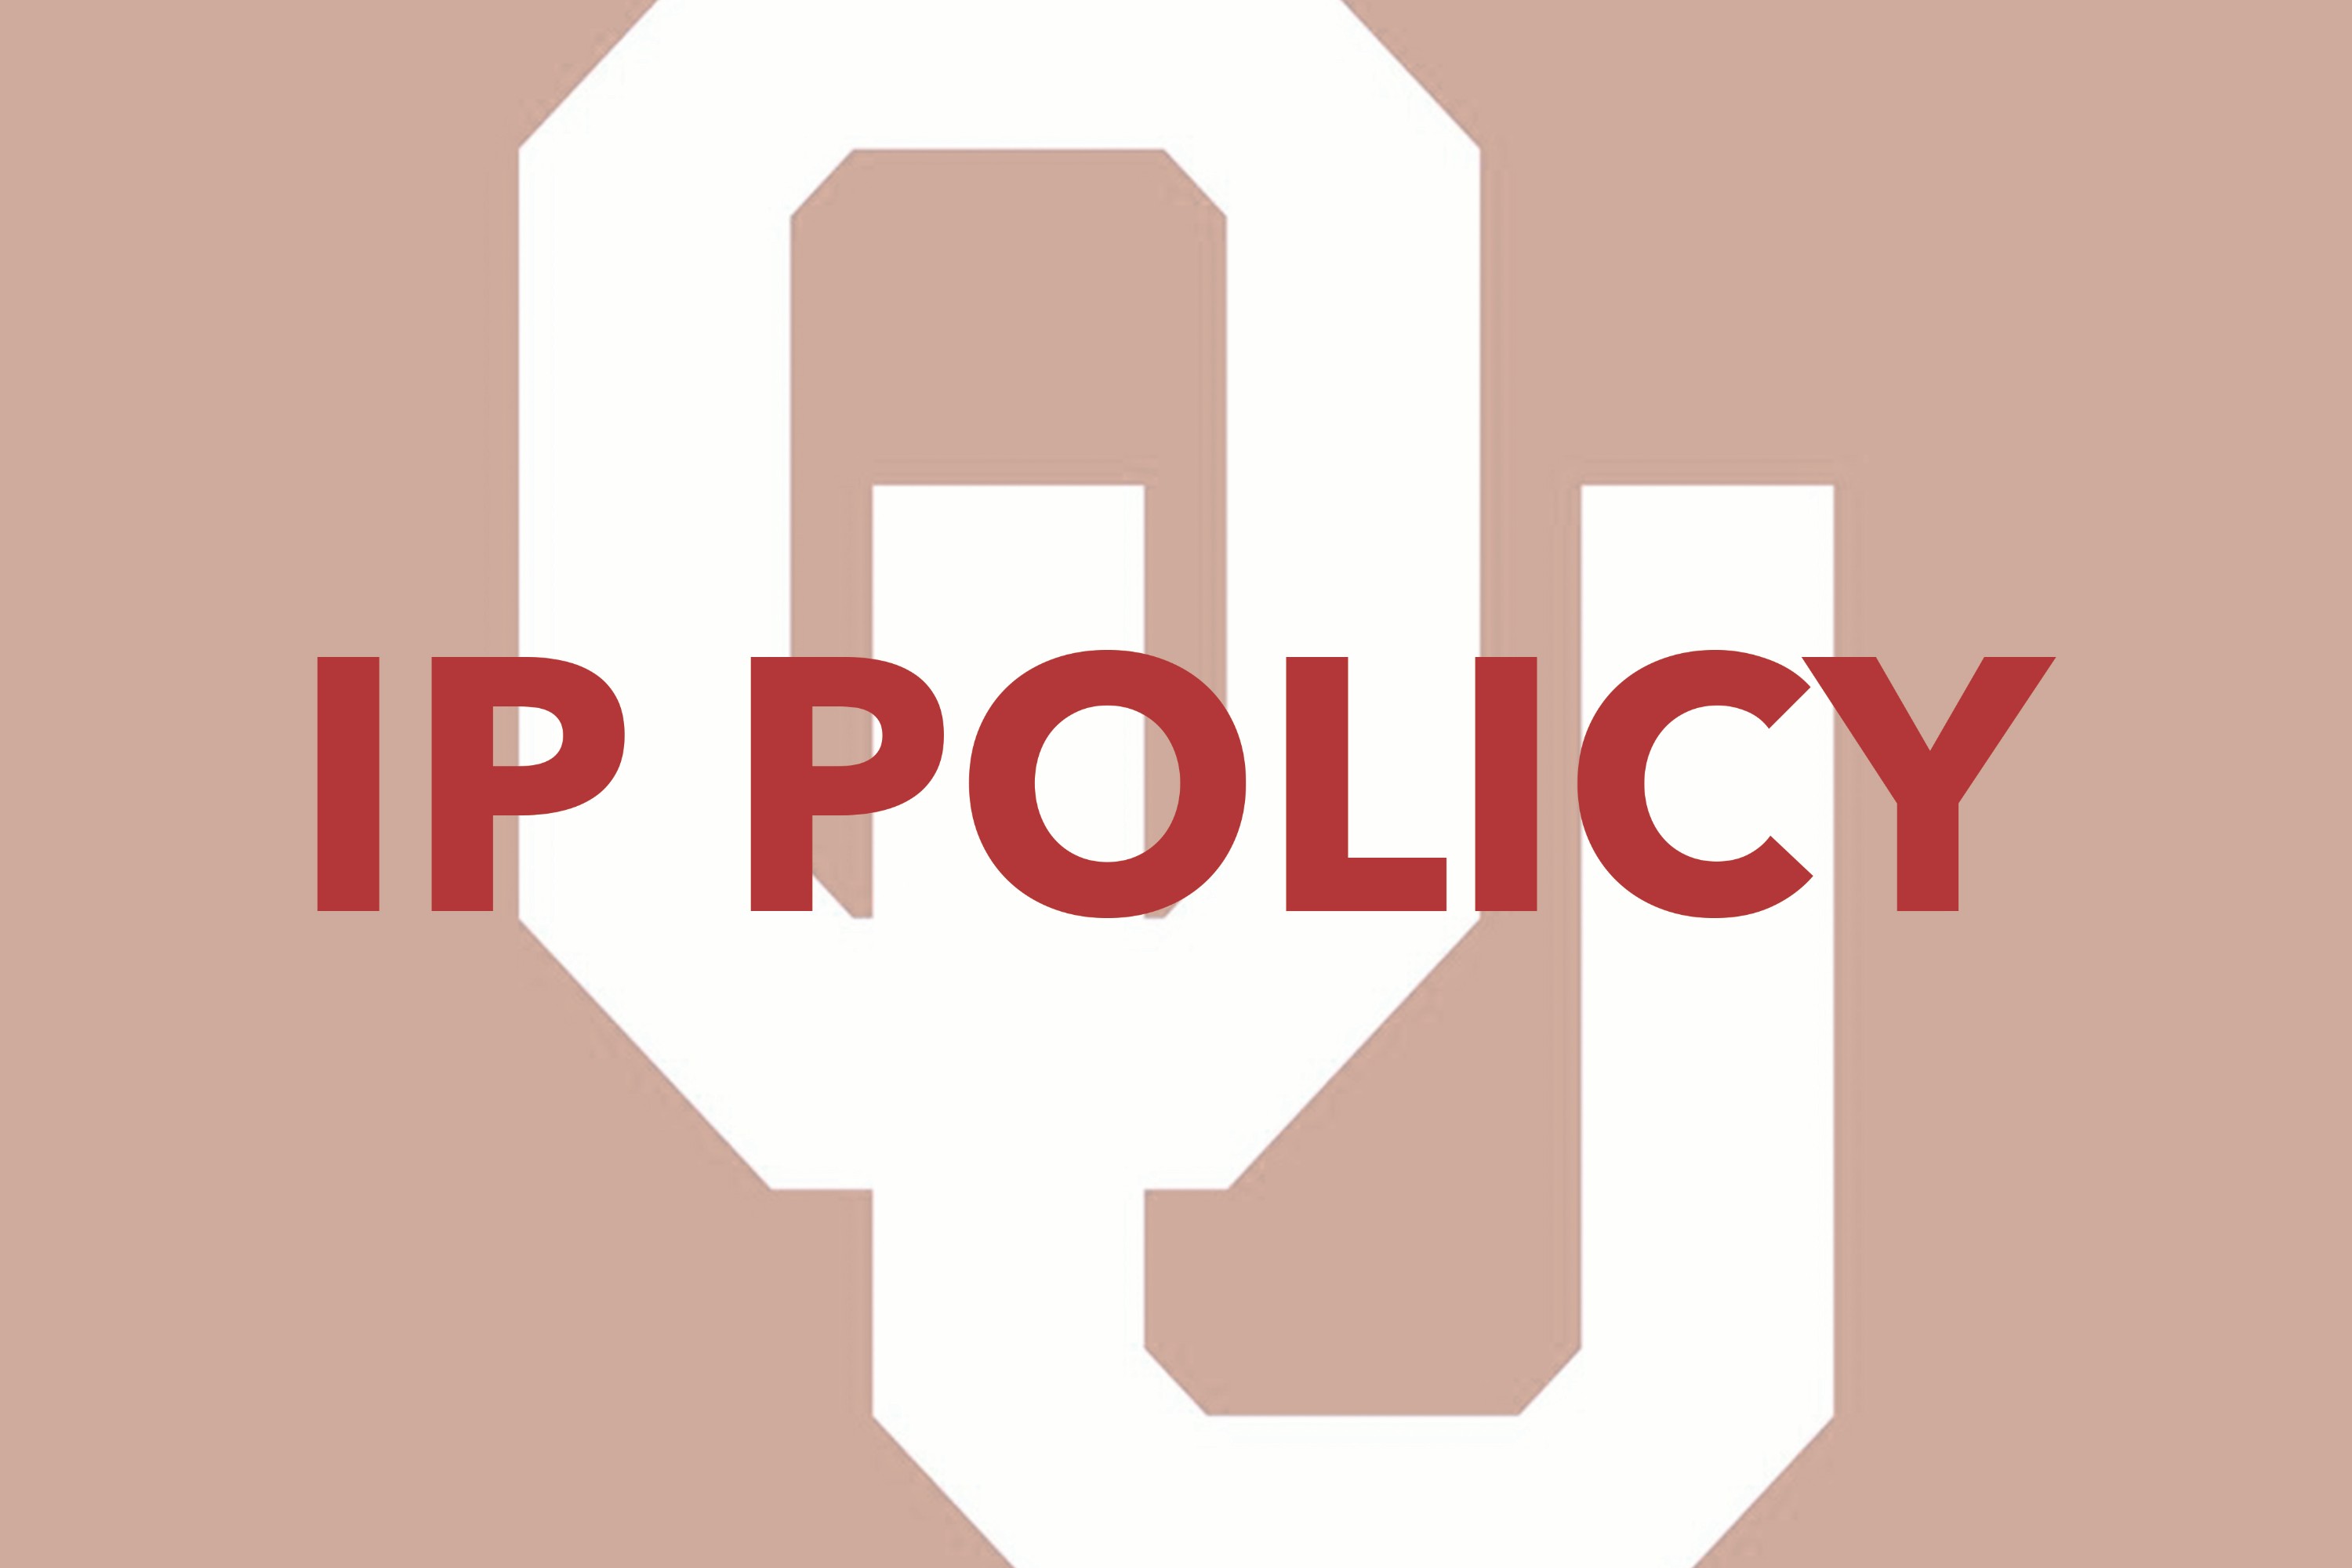 OU IP policy 